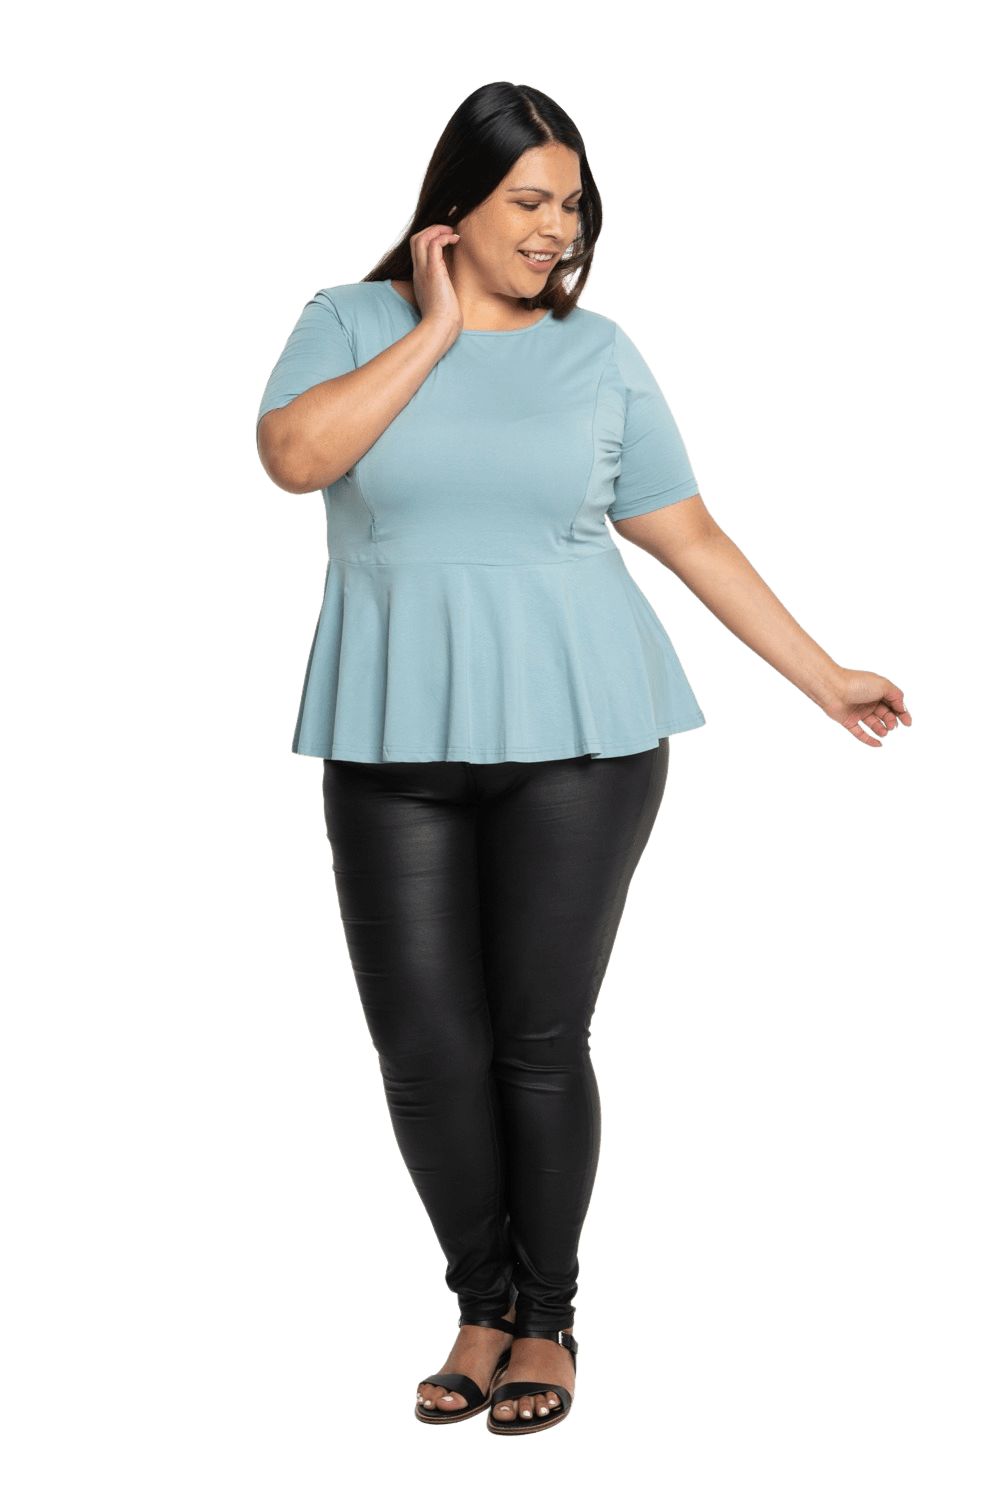 Curvy model facing camera wearing light blue short sleeved top. Featuring rounded neckline and peplum tier under bust. Isla available in sizes 6-26